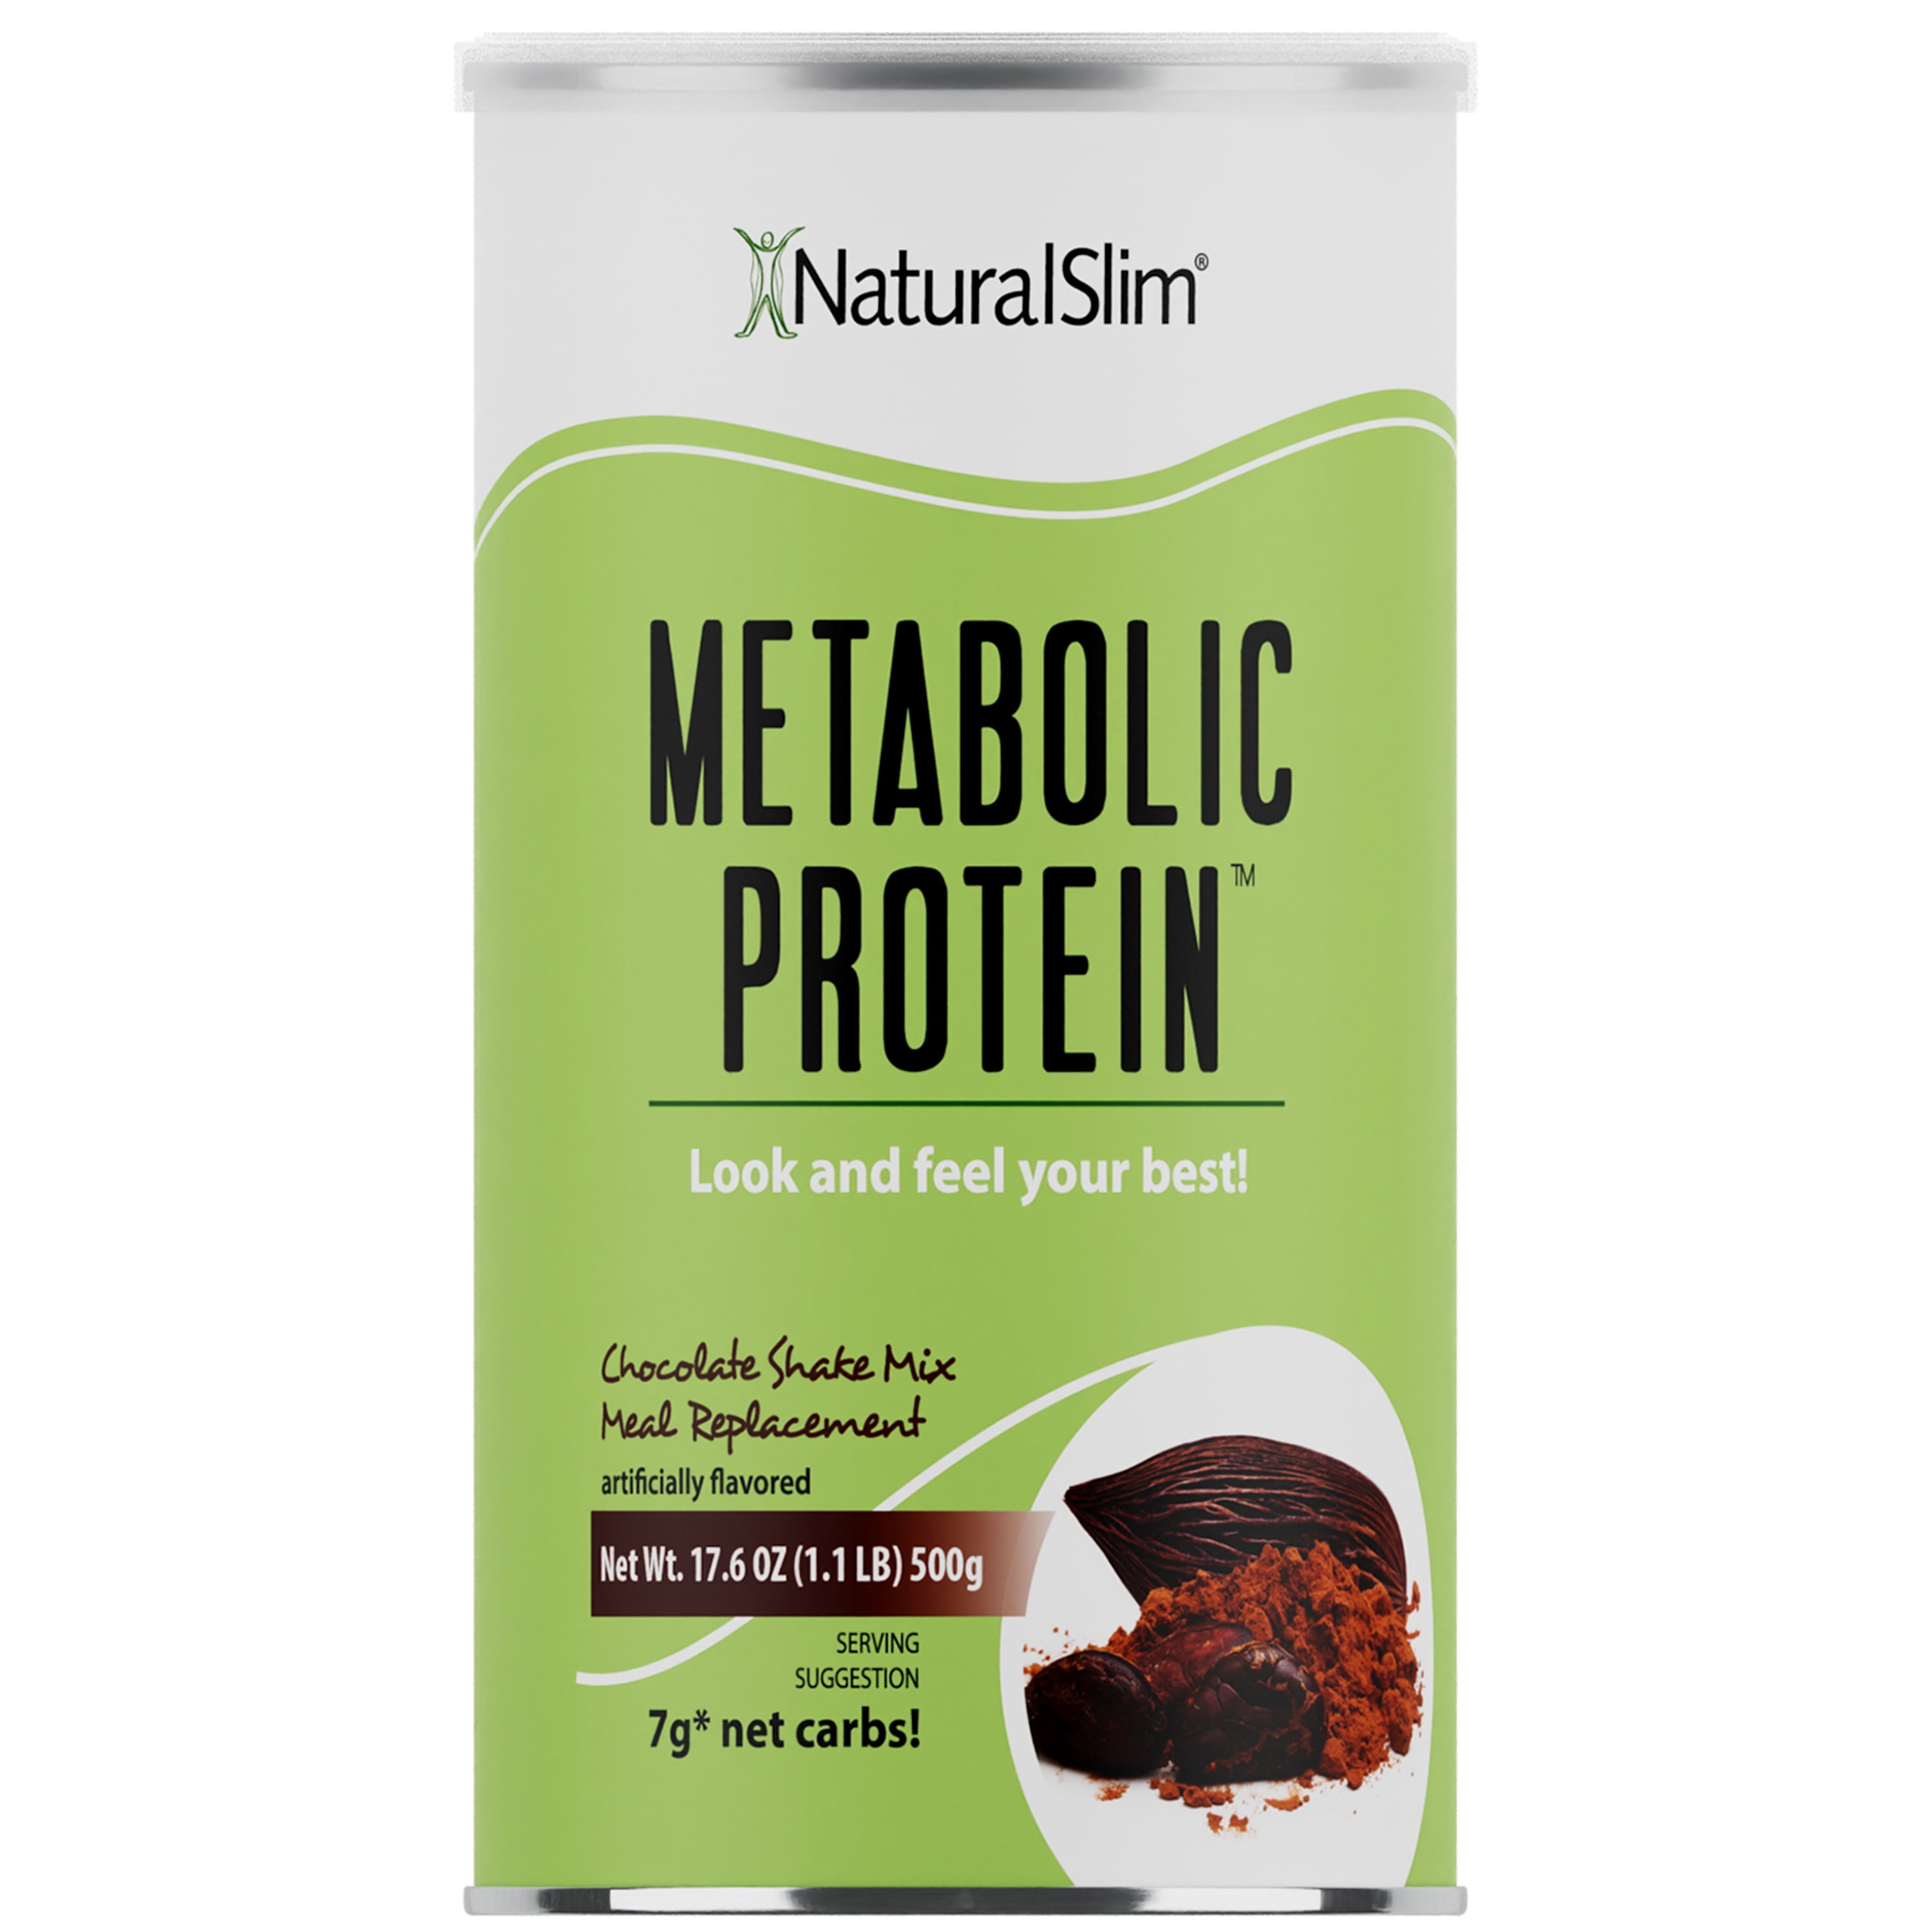 Nutrisystem ProSync Chocolate Meal Replacement Protein Shake Mix - 14  Servings